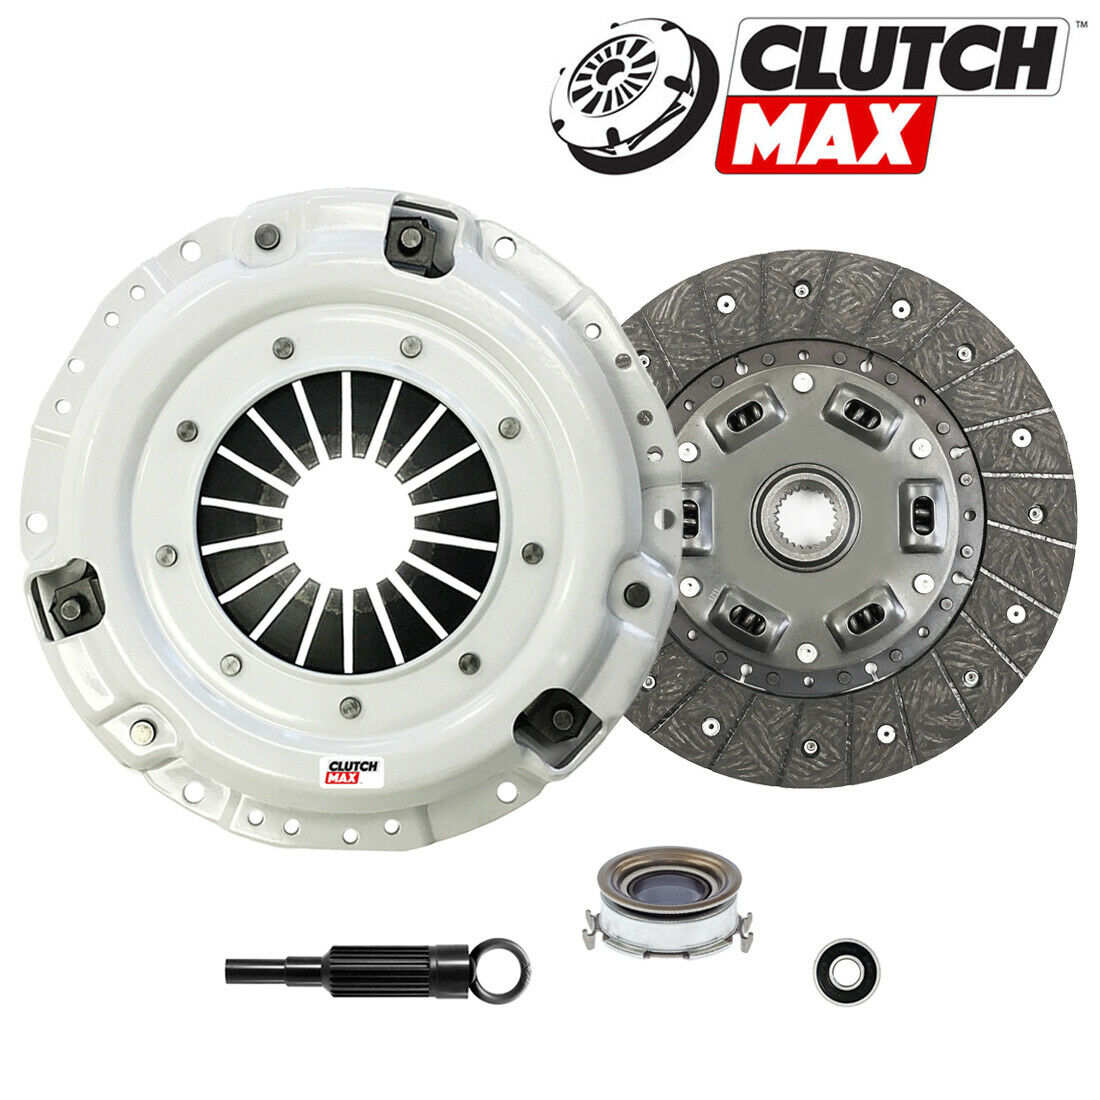 Clutchmax Oem Clutch Kit For Subaru Impreza Forester Legacy Outback 2.5l 3.0l Nt